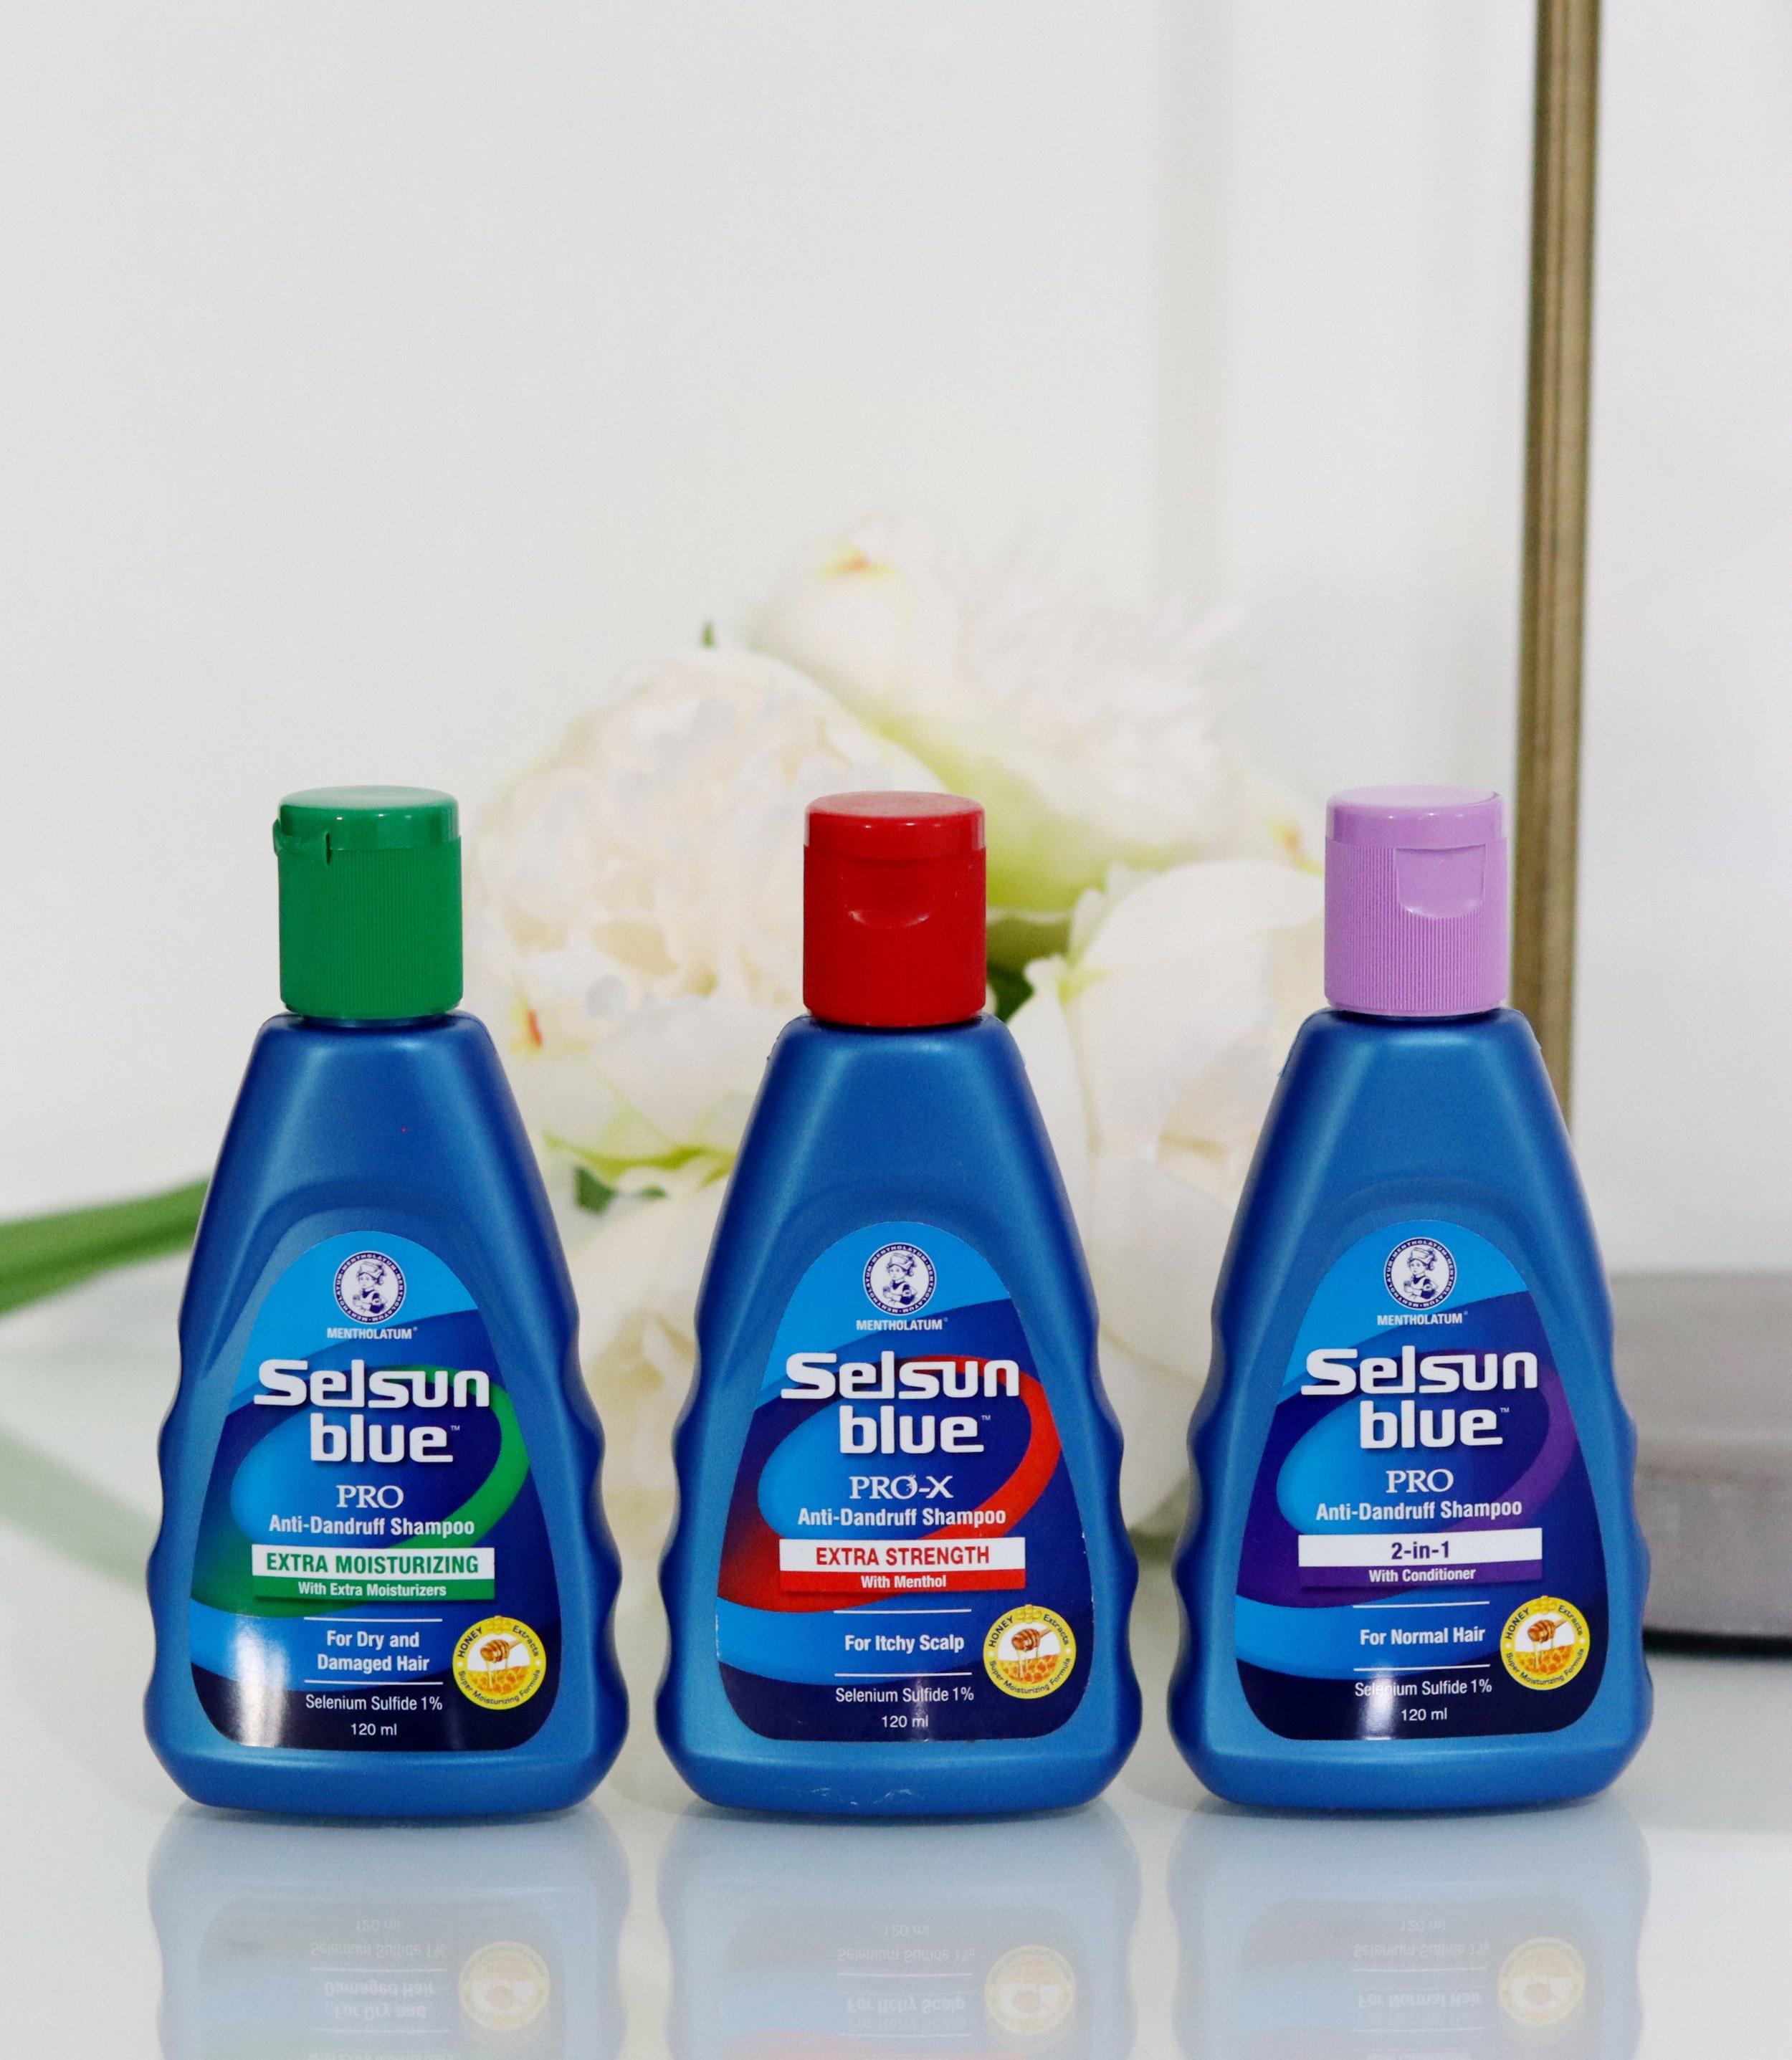 The difference between the Selsun Anti-Dandruff Shampoos — Project